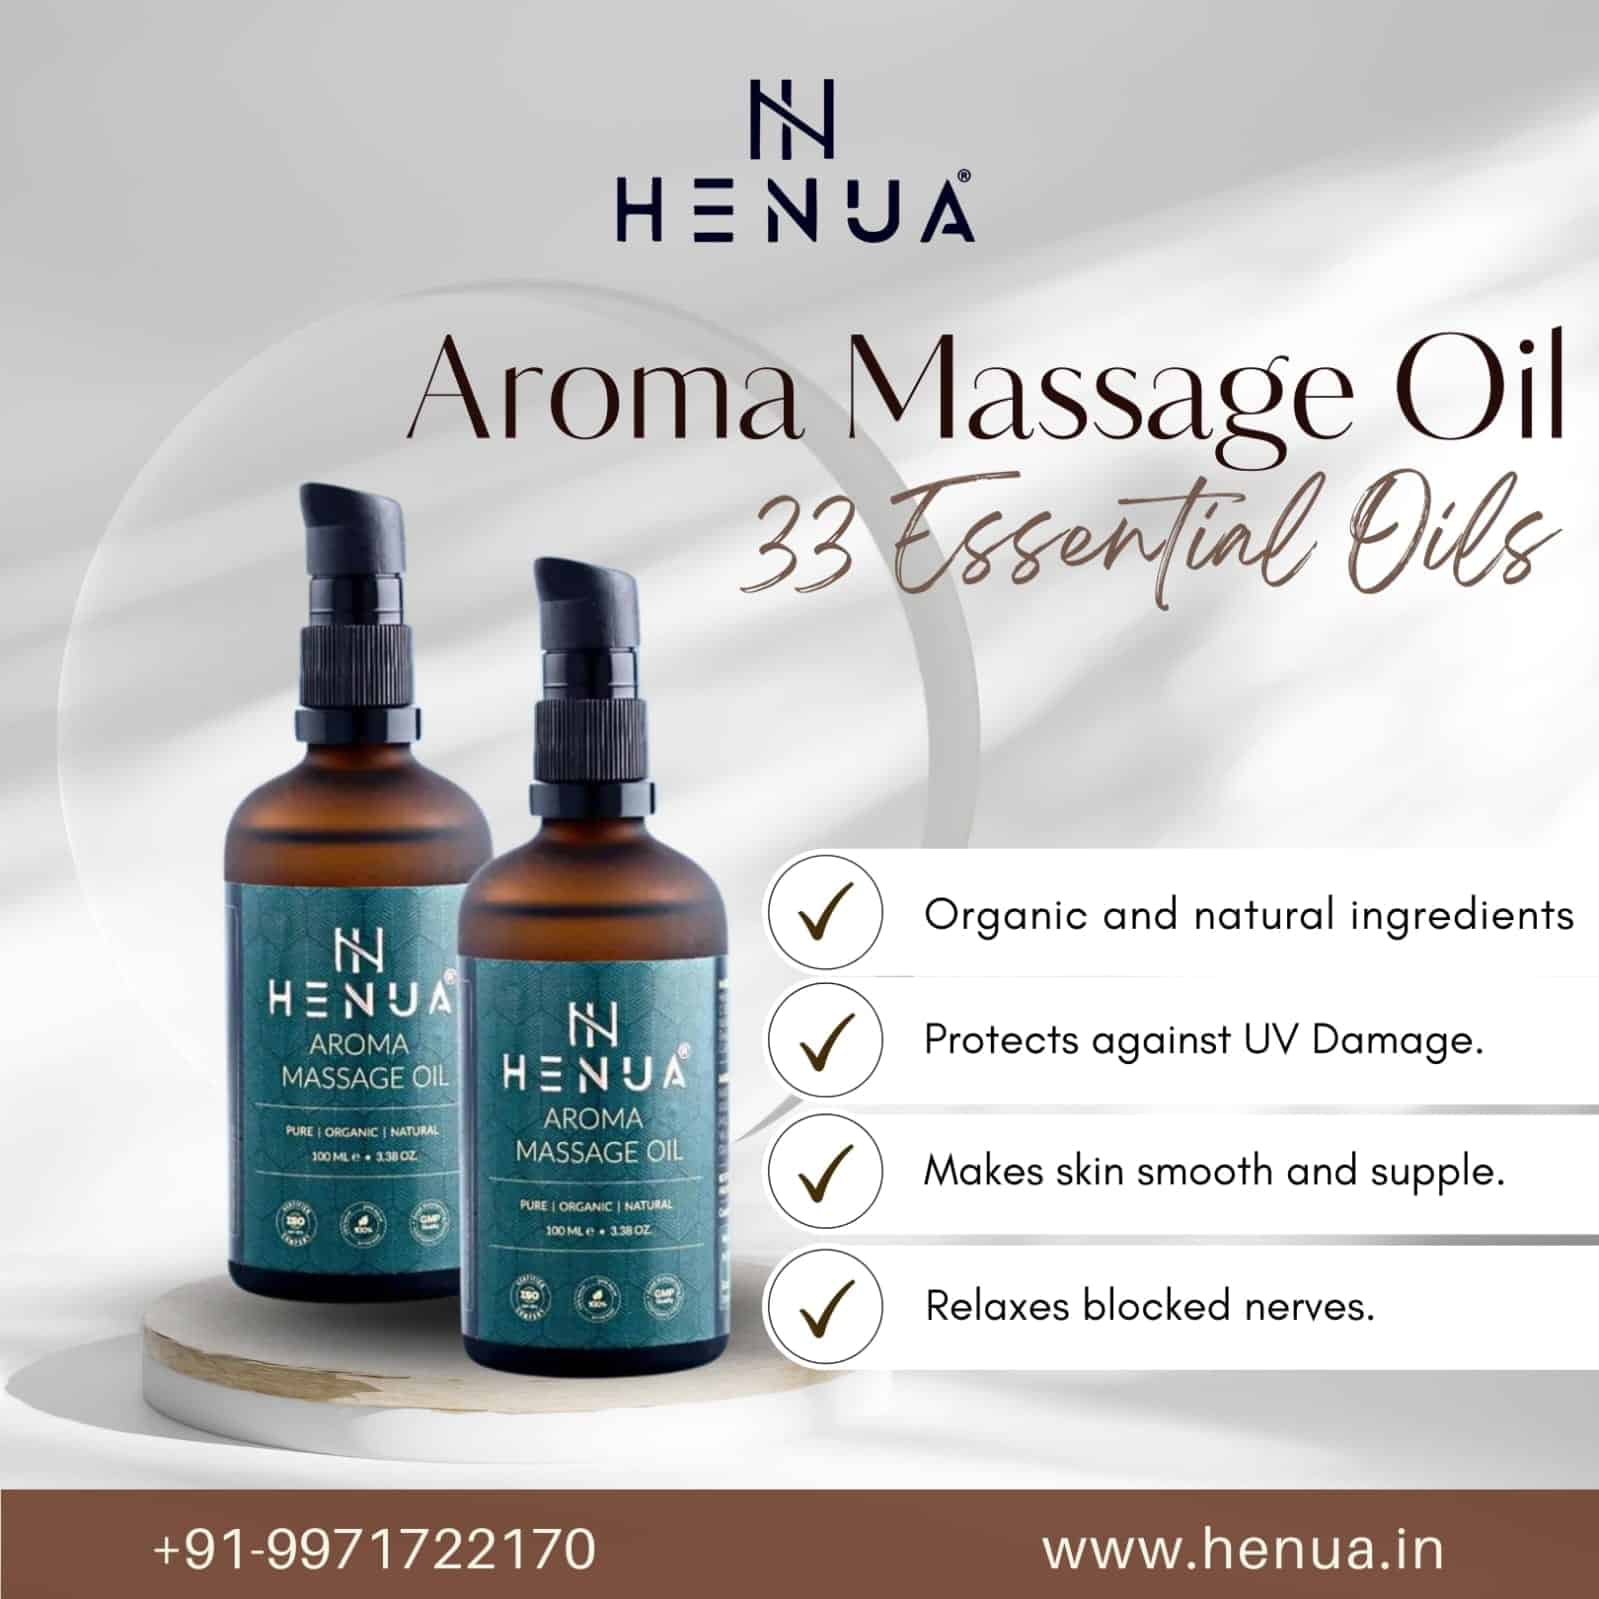 Get-Relief-With-Natural-Henua-Aroma-Massage-Oil